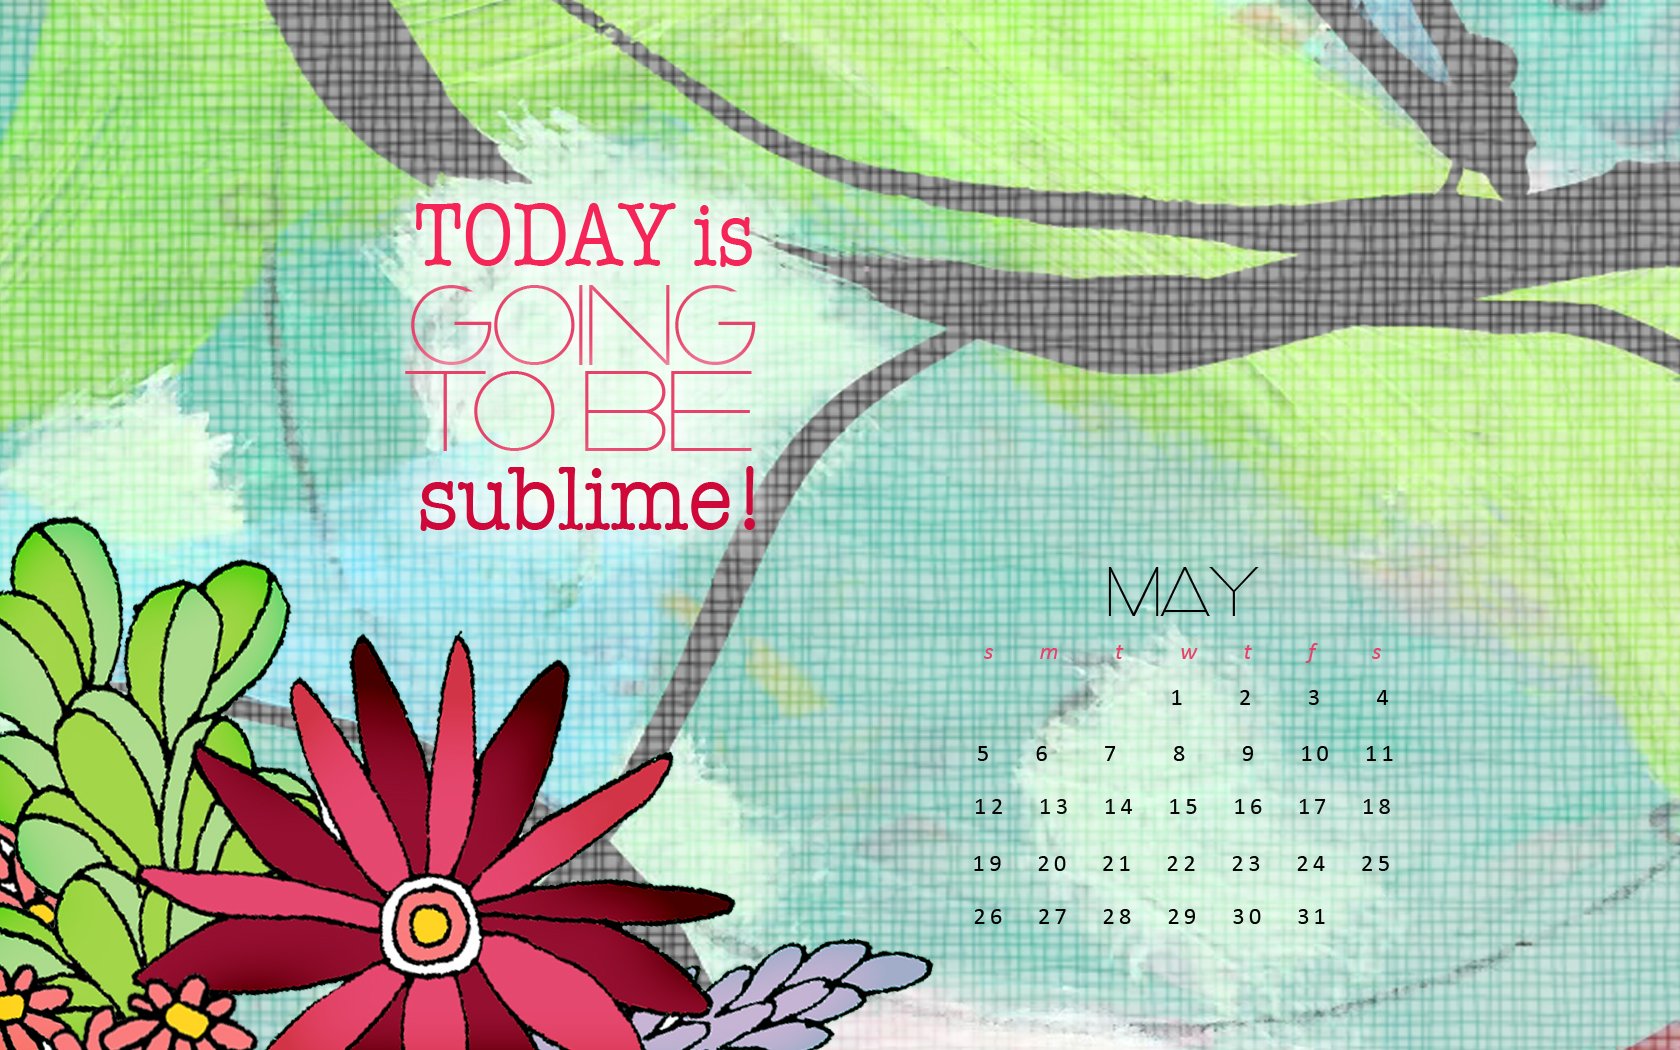 May 2013 Desktop Wallpaper May pun intended you have a